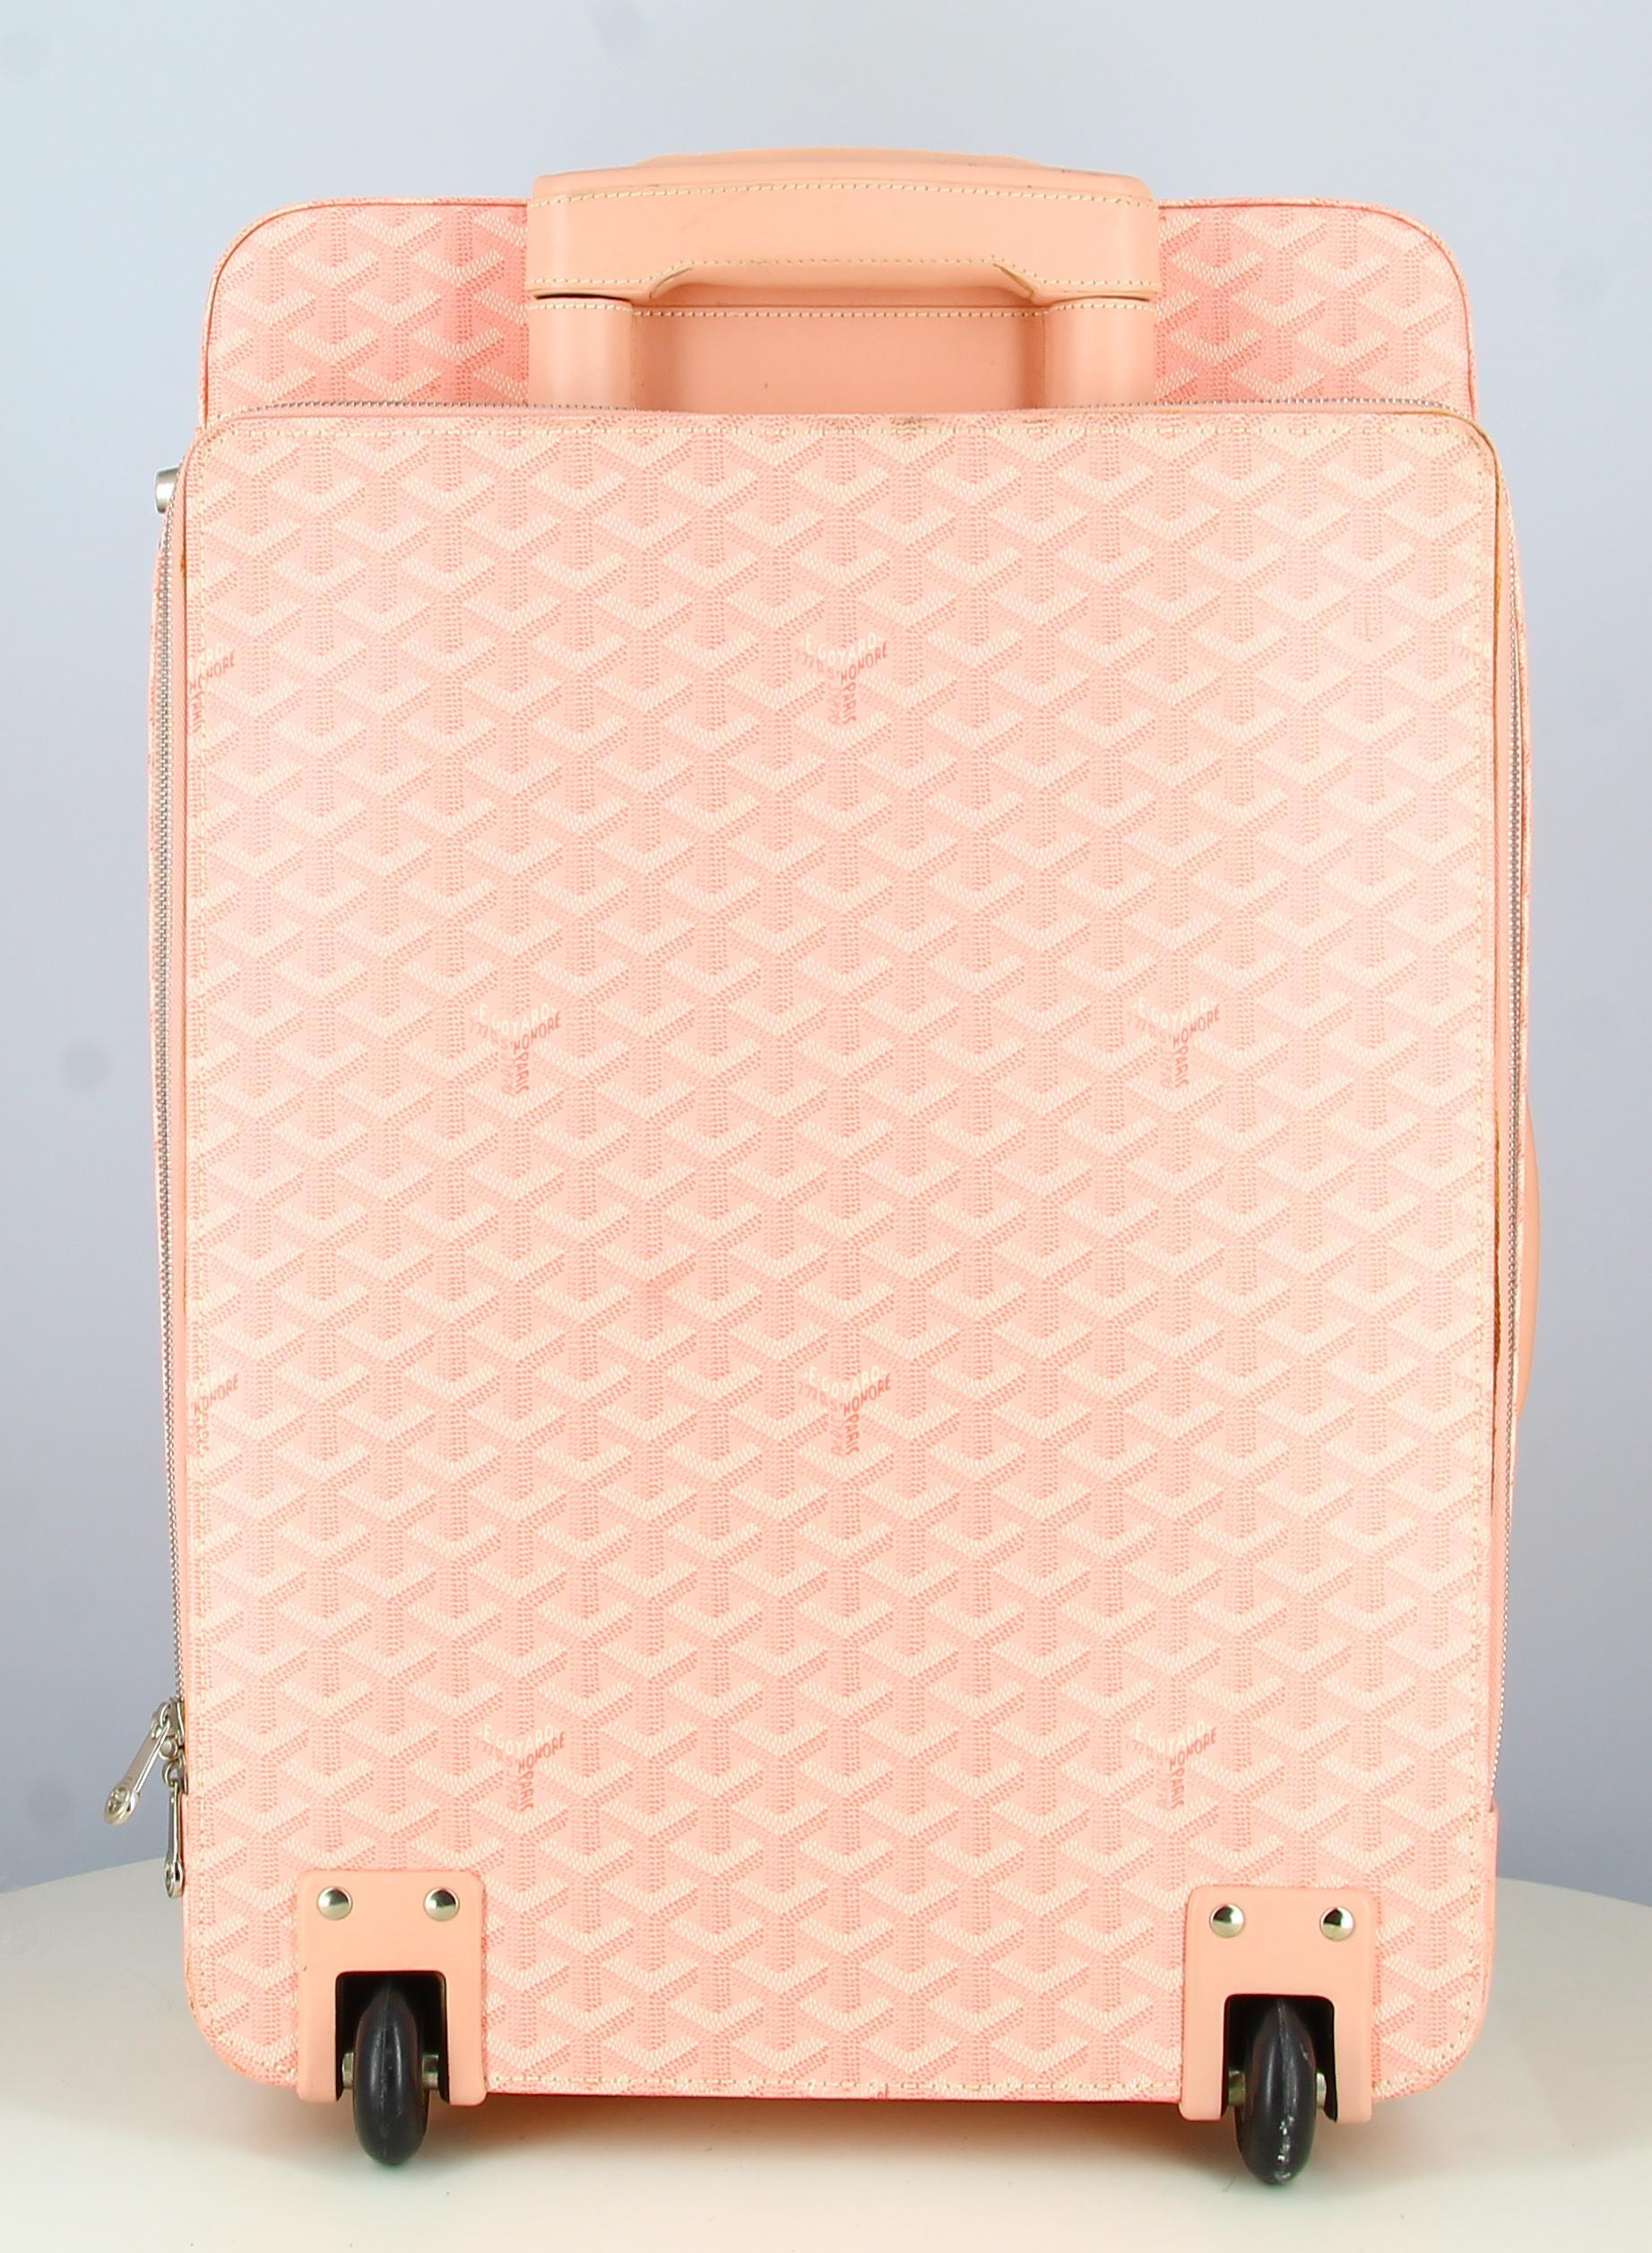 Ken Goyard Monogram Pink Suitcase.
One of a kind, special order painted and customize in the Goyard Ateliers
- Very good condition. Very slight traces of wear with time. 
- Monogram pink goyardine
- Ken's face on the front in black
- Zip fastener
-